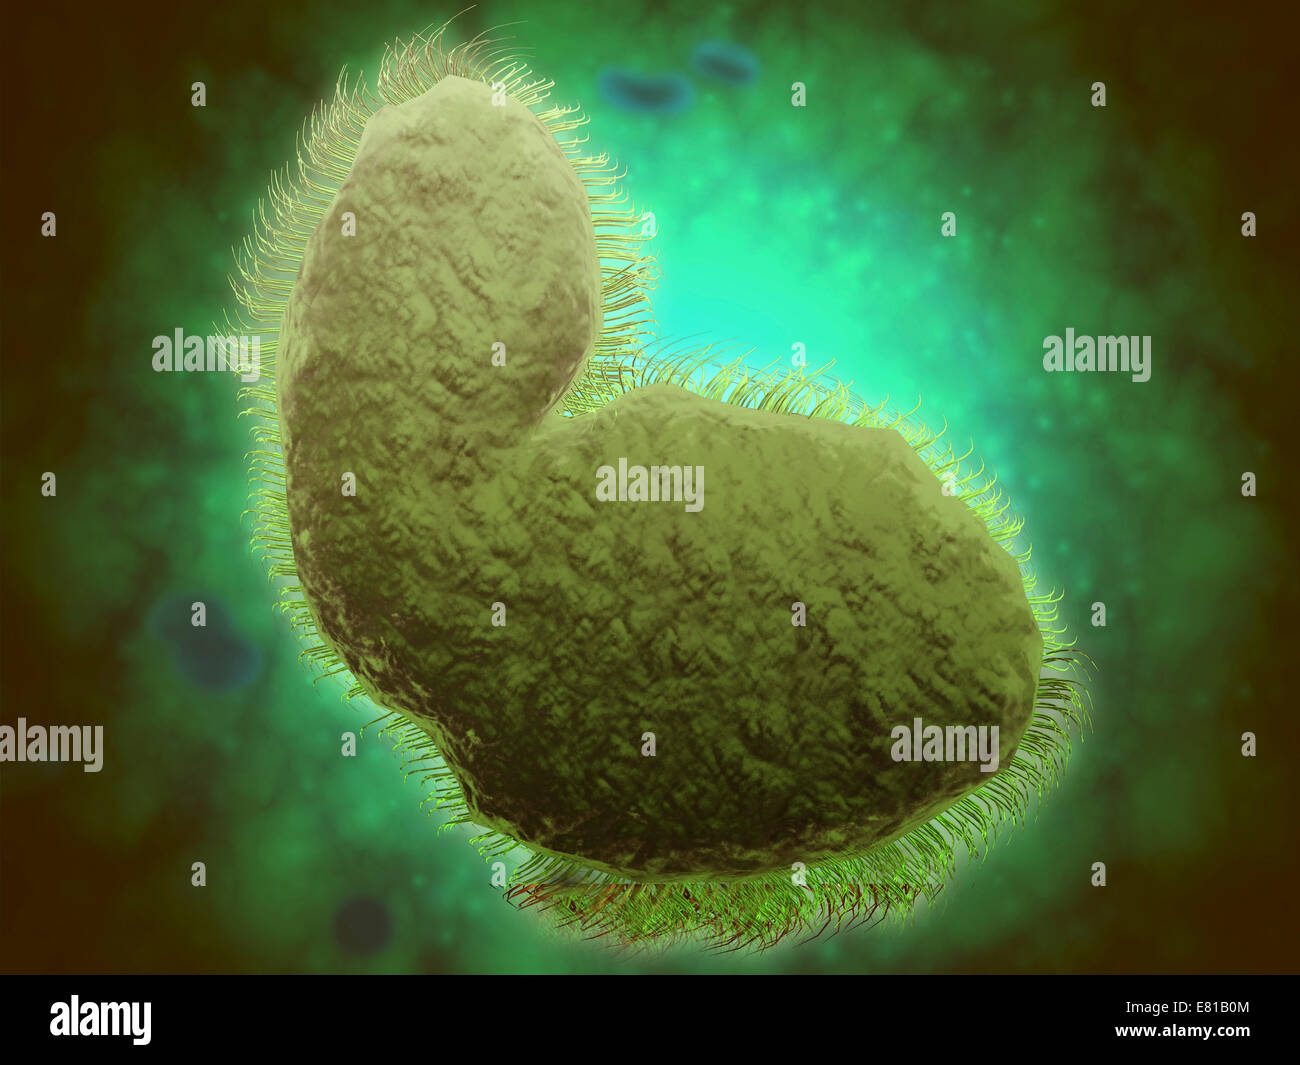 Cold Virus Cell Stock Photos & Cold Virus Cell Stock Images - Alamy